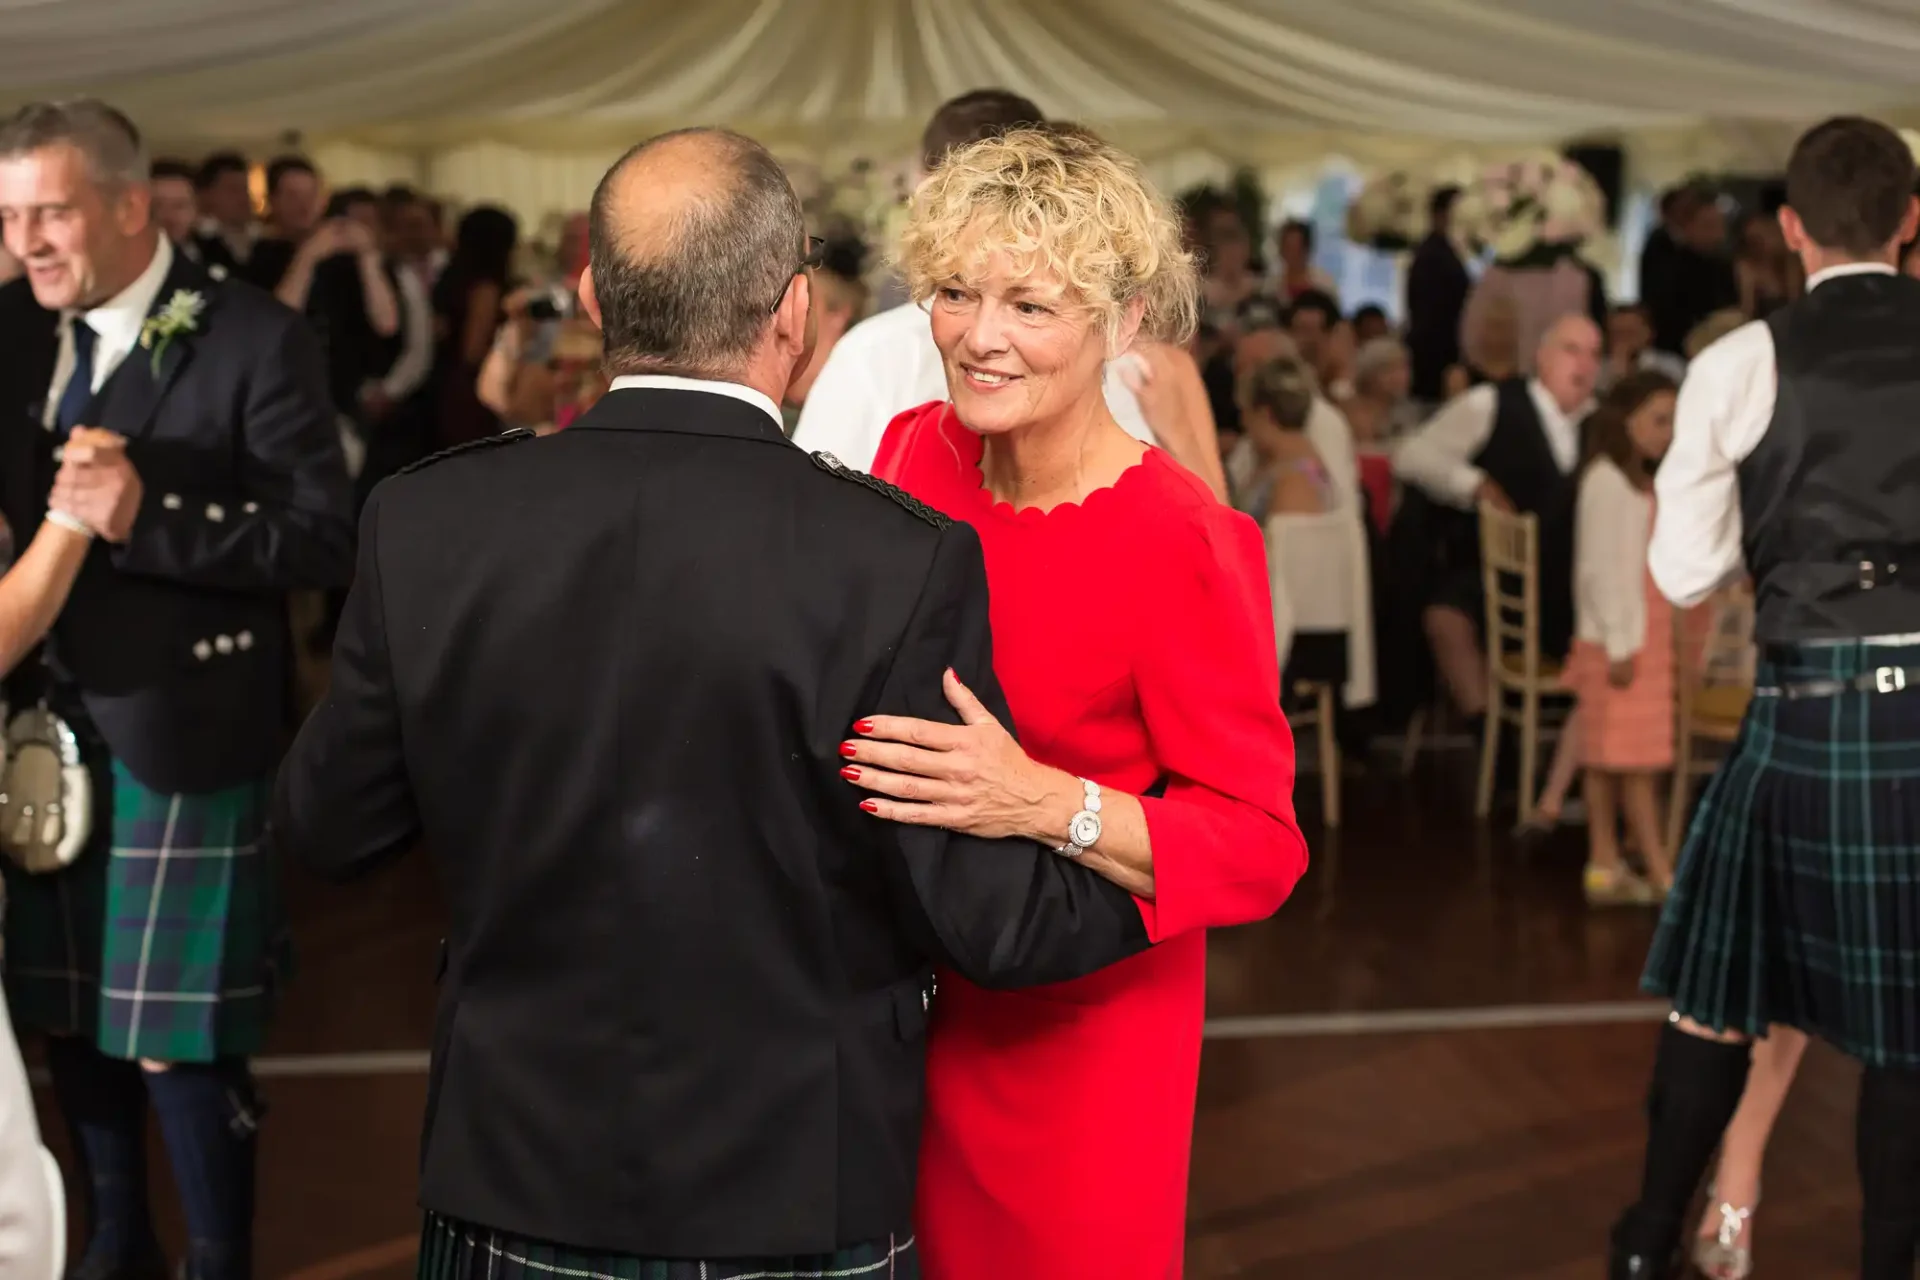 A woman in a red dress dancing with a man in a kilt at a lively wedding reception.